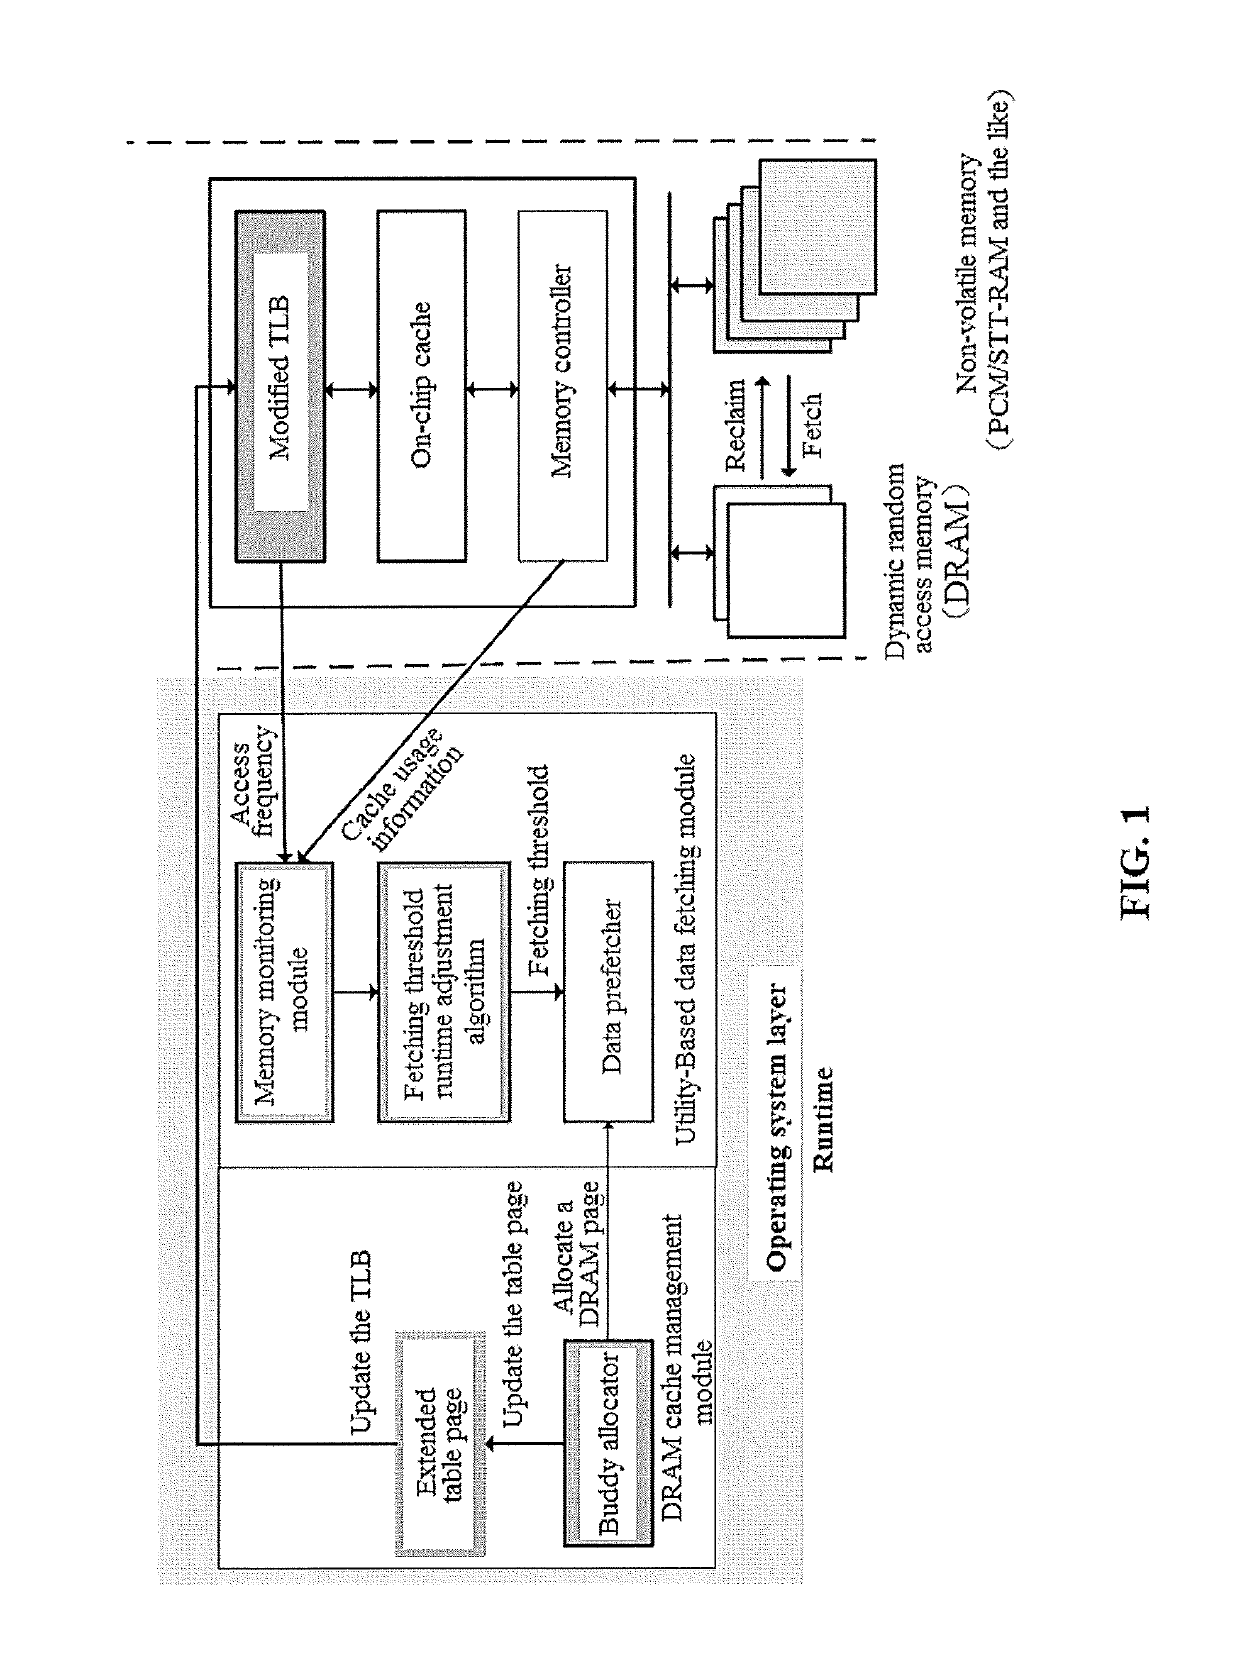 DRAM/NVM hierarchical heterogeneous memory access method and system with software-hardware cooperative management